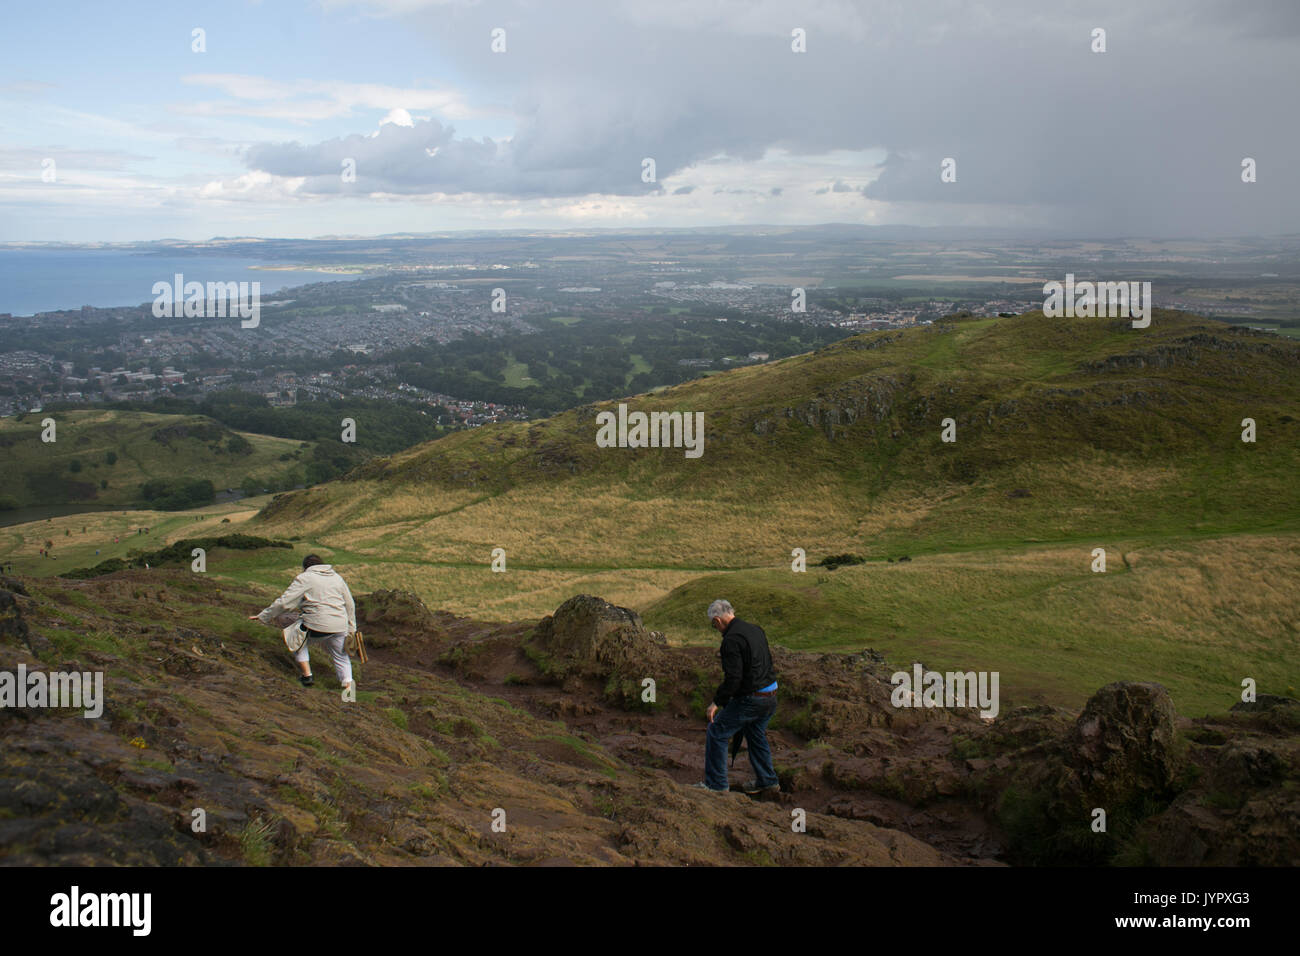 Walkers descending the peak. The peak of King Arthur's Seat is a popular destination for both locals and tourists. The peak and souronding rocky hills Stock Photo